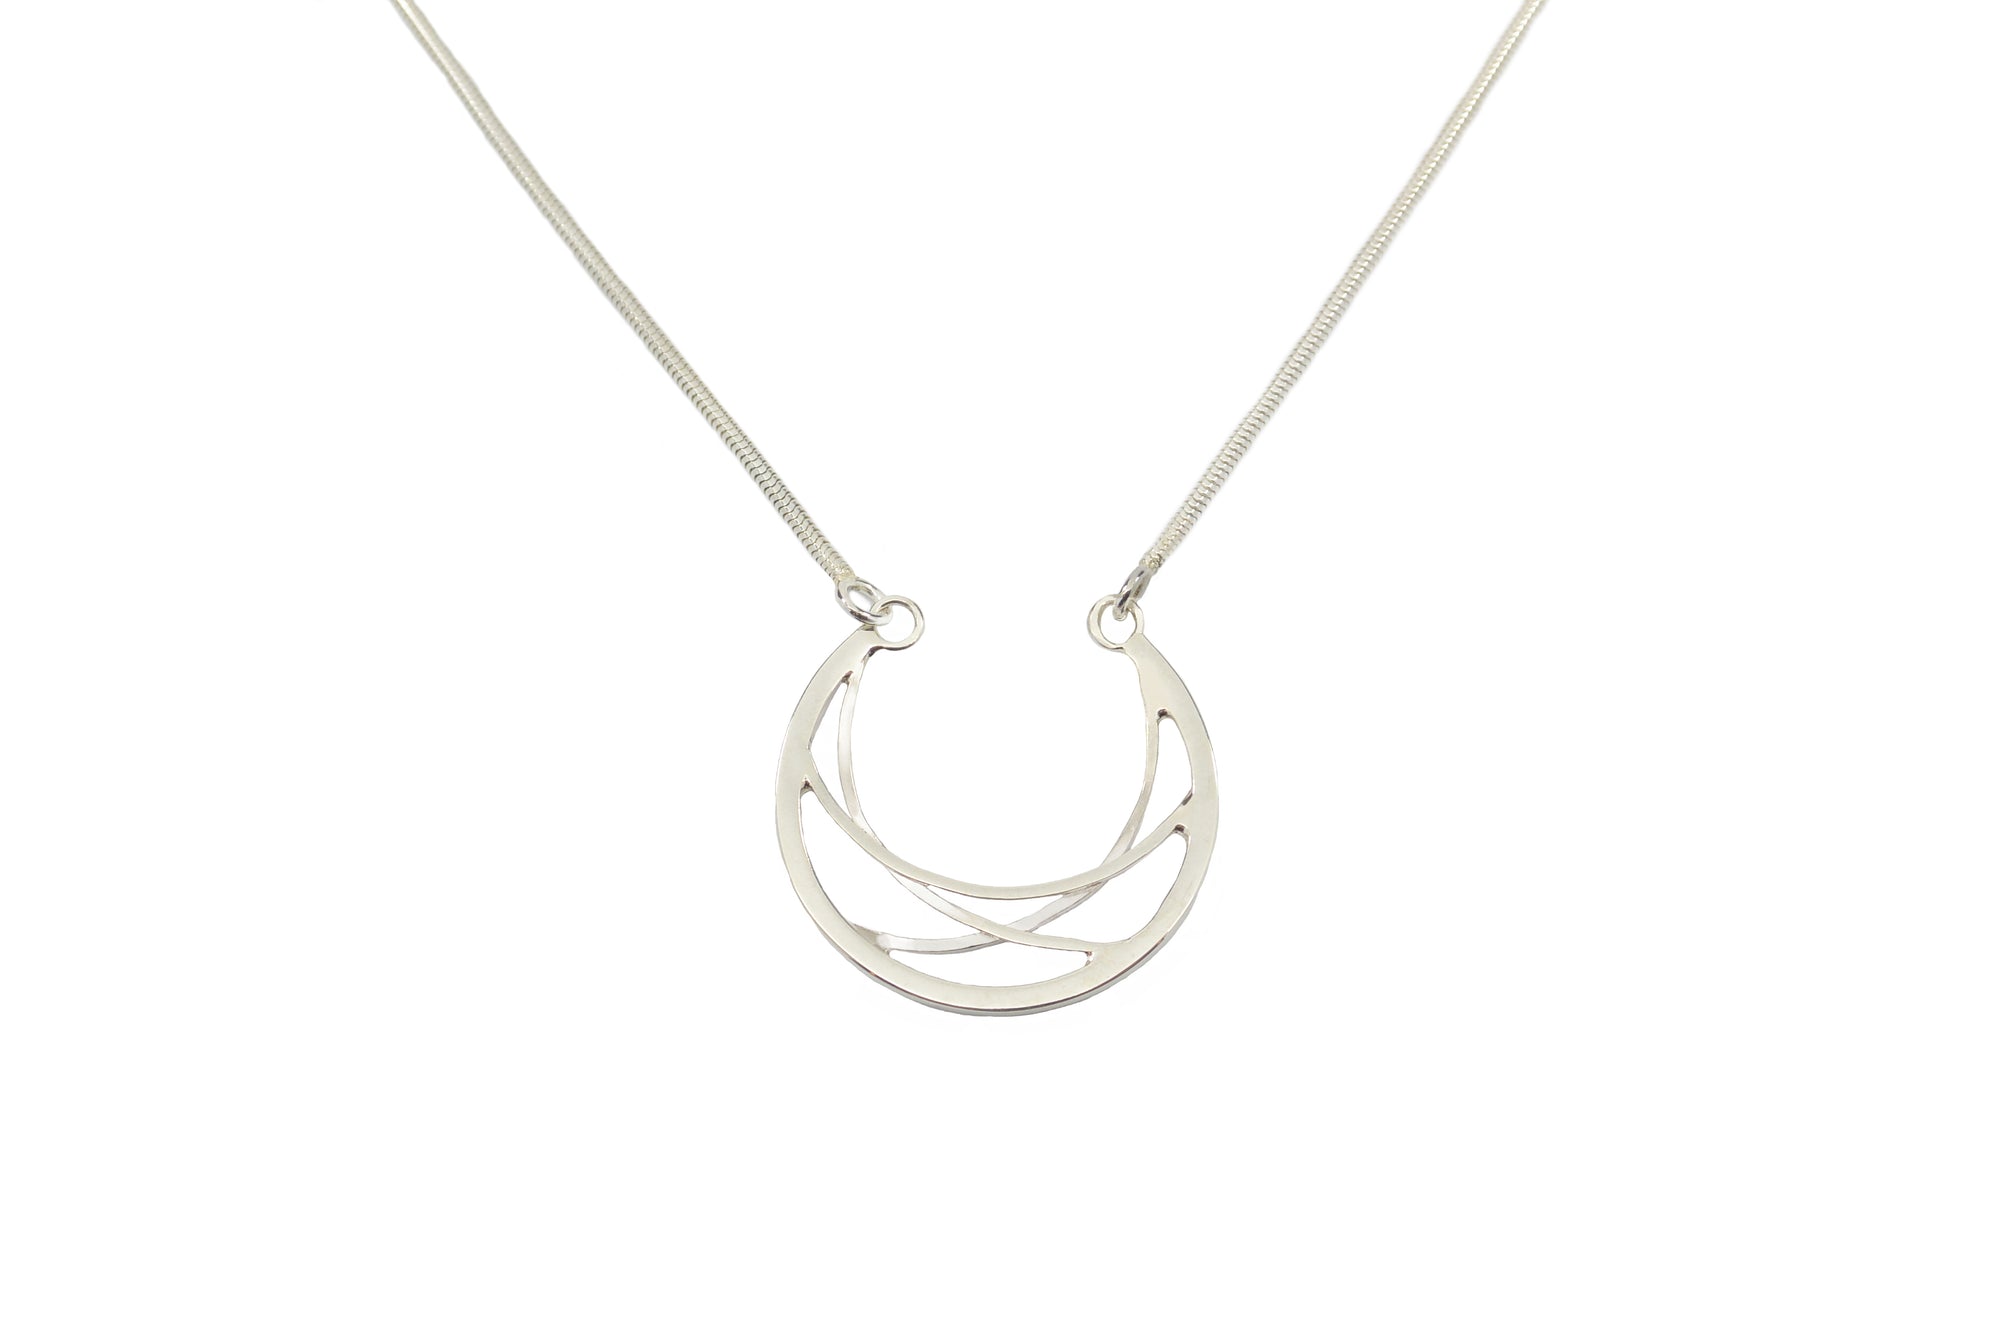 A handmade sterling silver crescent necklace on a silver chain